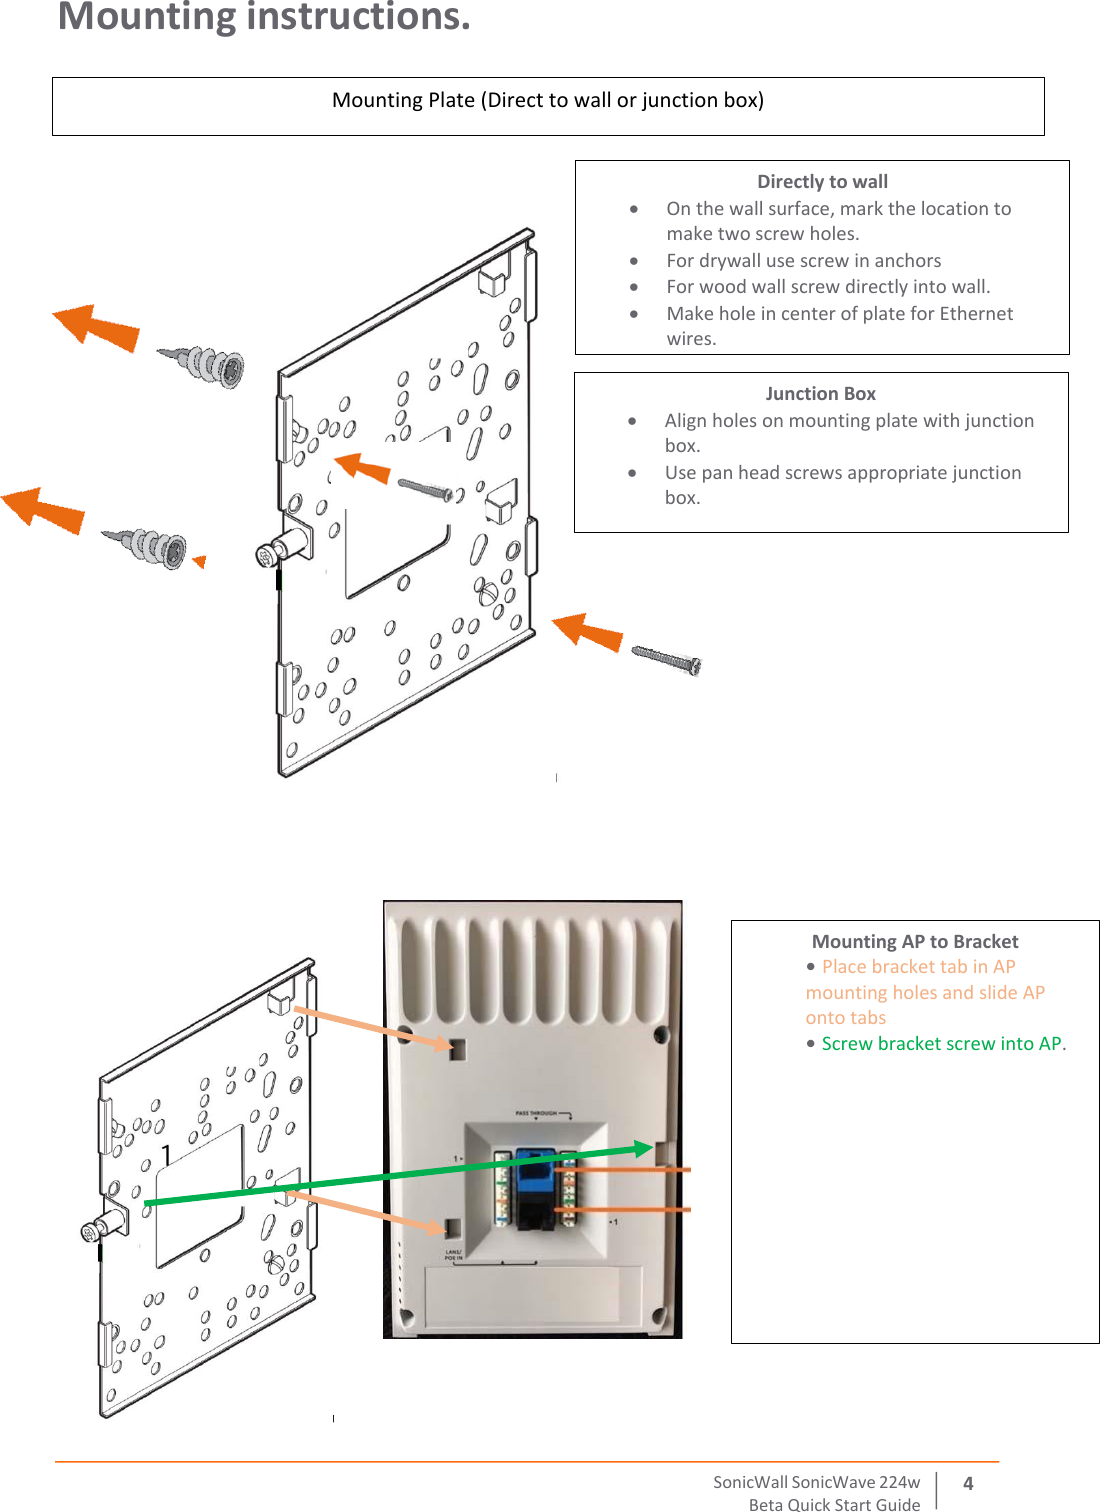  SonicWall   SonicWave   224 w Beta   Quick   Start   Guide 4 Mounting instructions.             Mounting Plate (Direct to wall or junction box) Directly to wall  On the wall surface, mark the location to make two screw holes.   For drywall use screw in anchors  For wood wall screw directly into wall.  Make hole in center of plate for Ethernet wires.  Junction Box  Align holes on mounting plate with junction box.    Use pan head screws appropriate junction box. Mounting AP to Bracket • Place bracket tab in AP mounting holes and slide AP onto tabs    • Screw bracket screw into AP.  